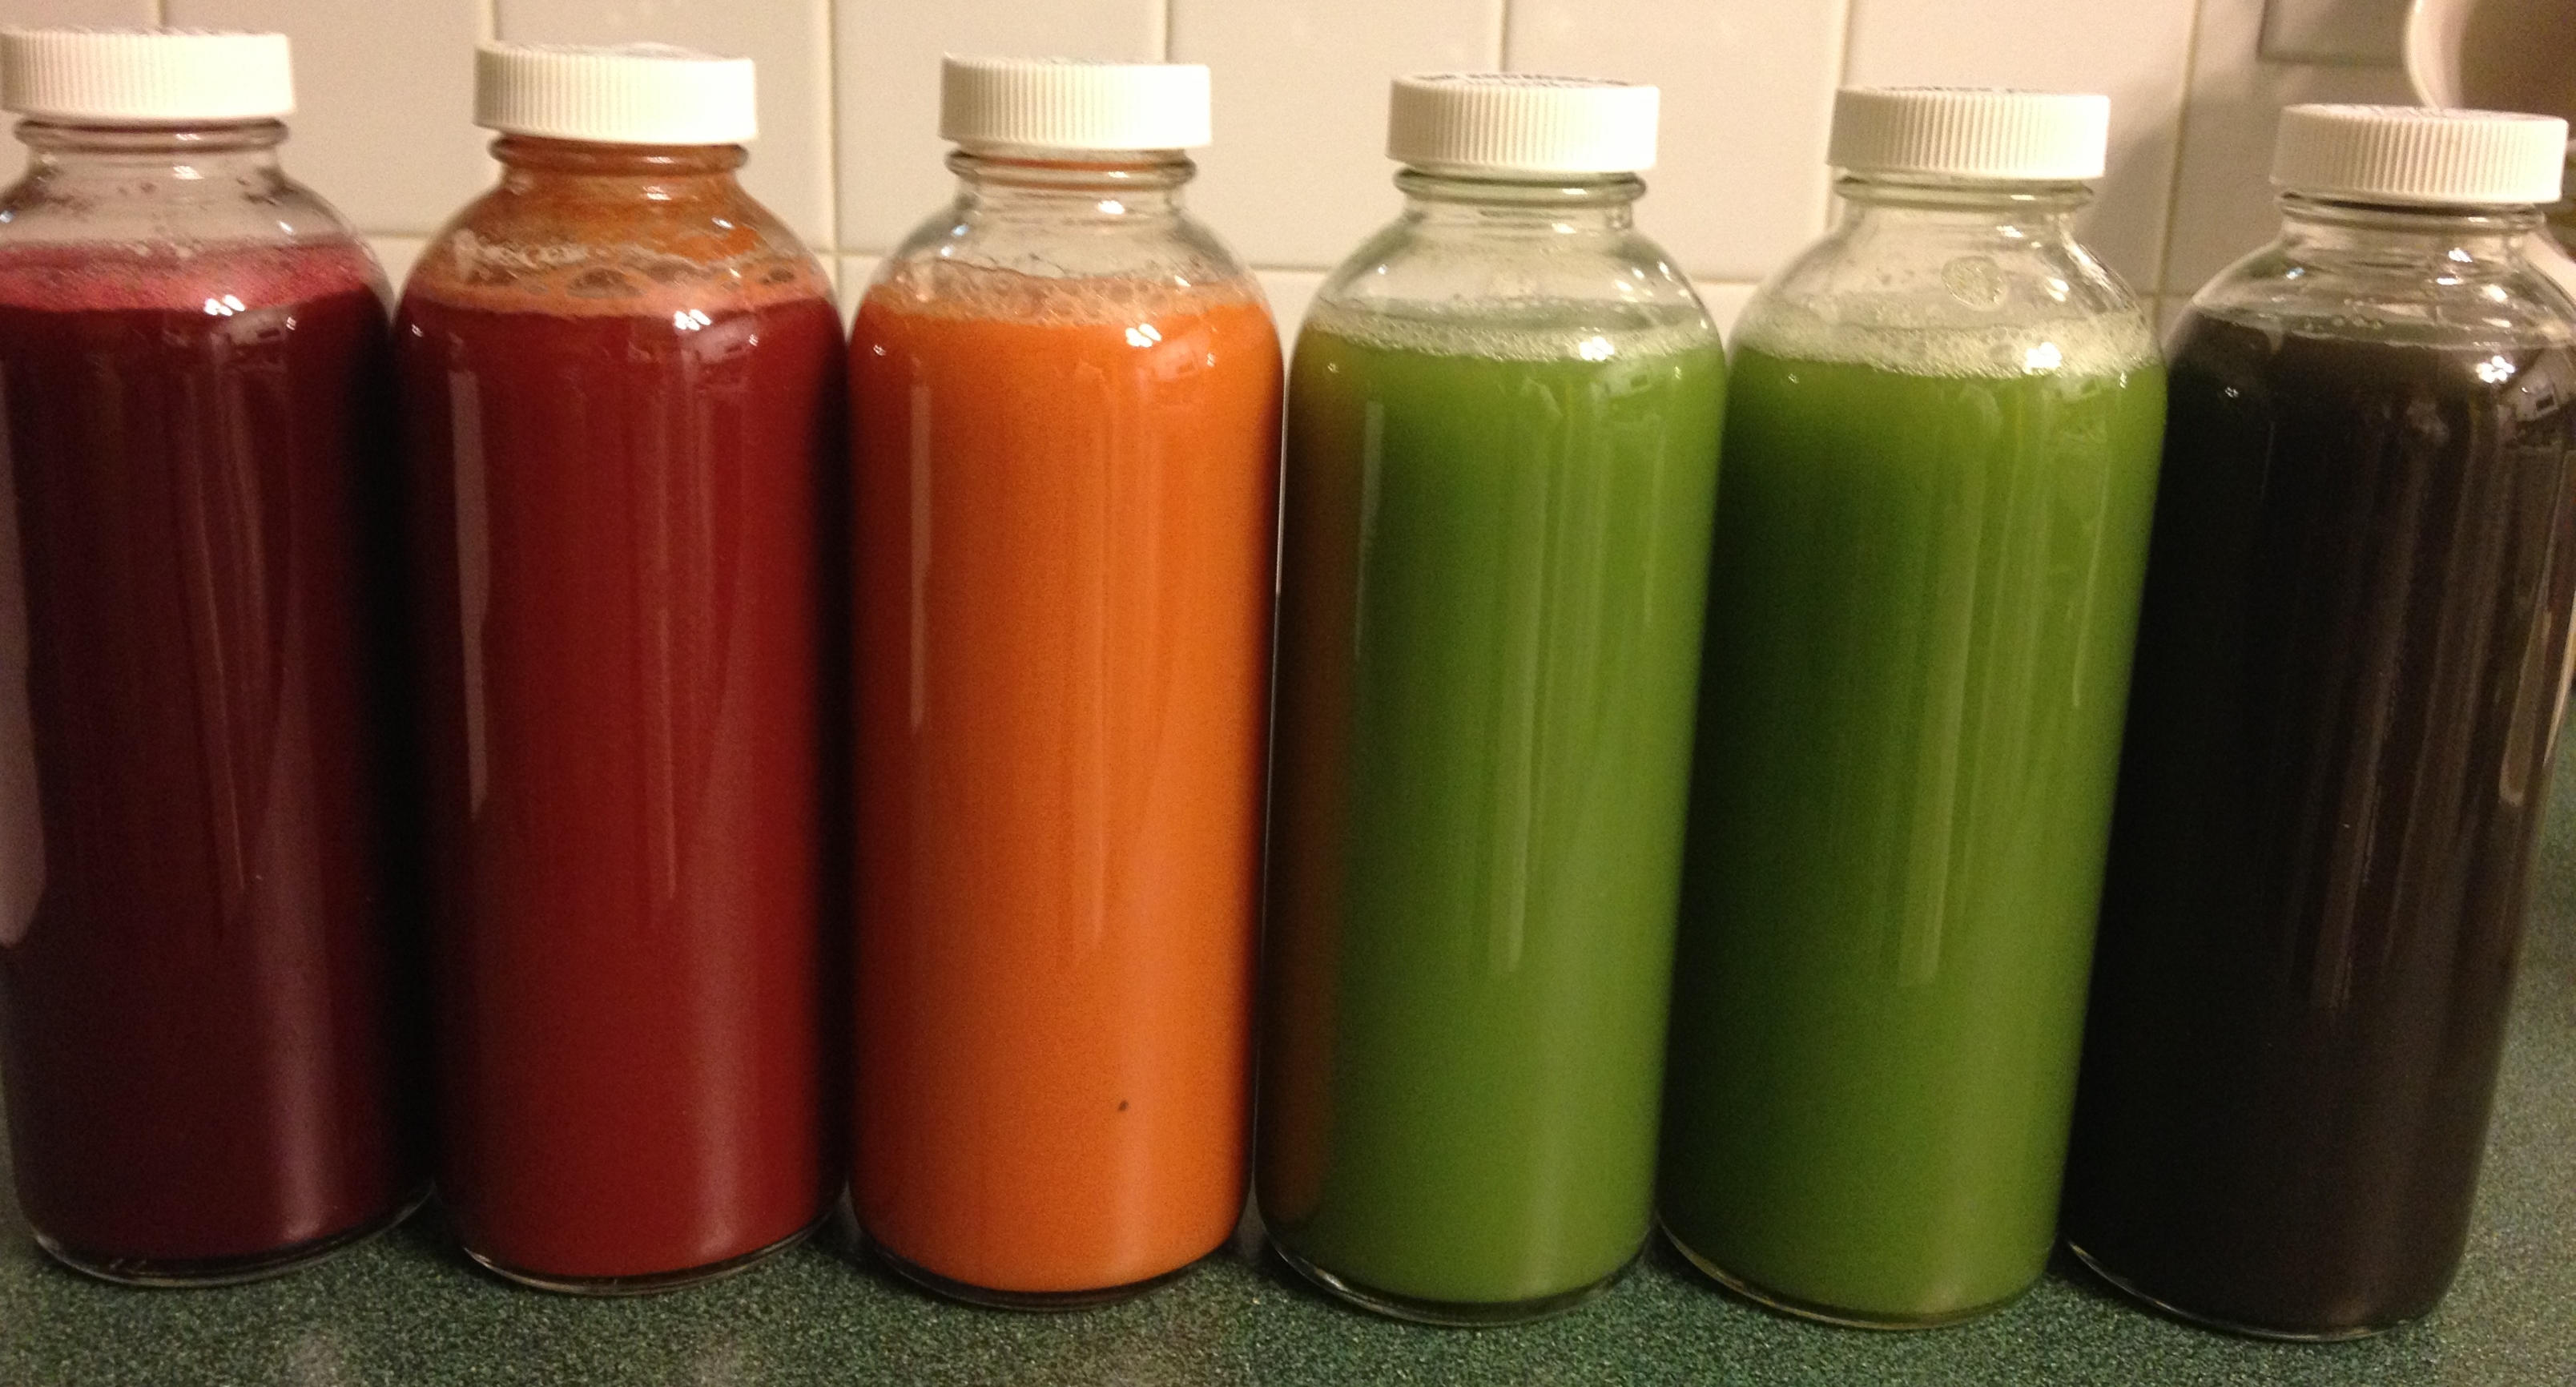 JUICE CLEANSE RECIPES 2 DAY